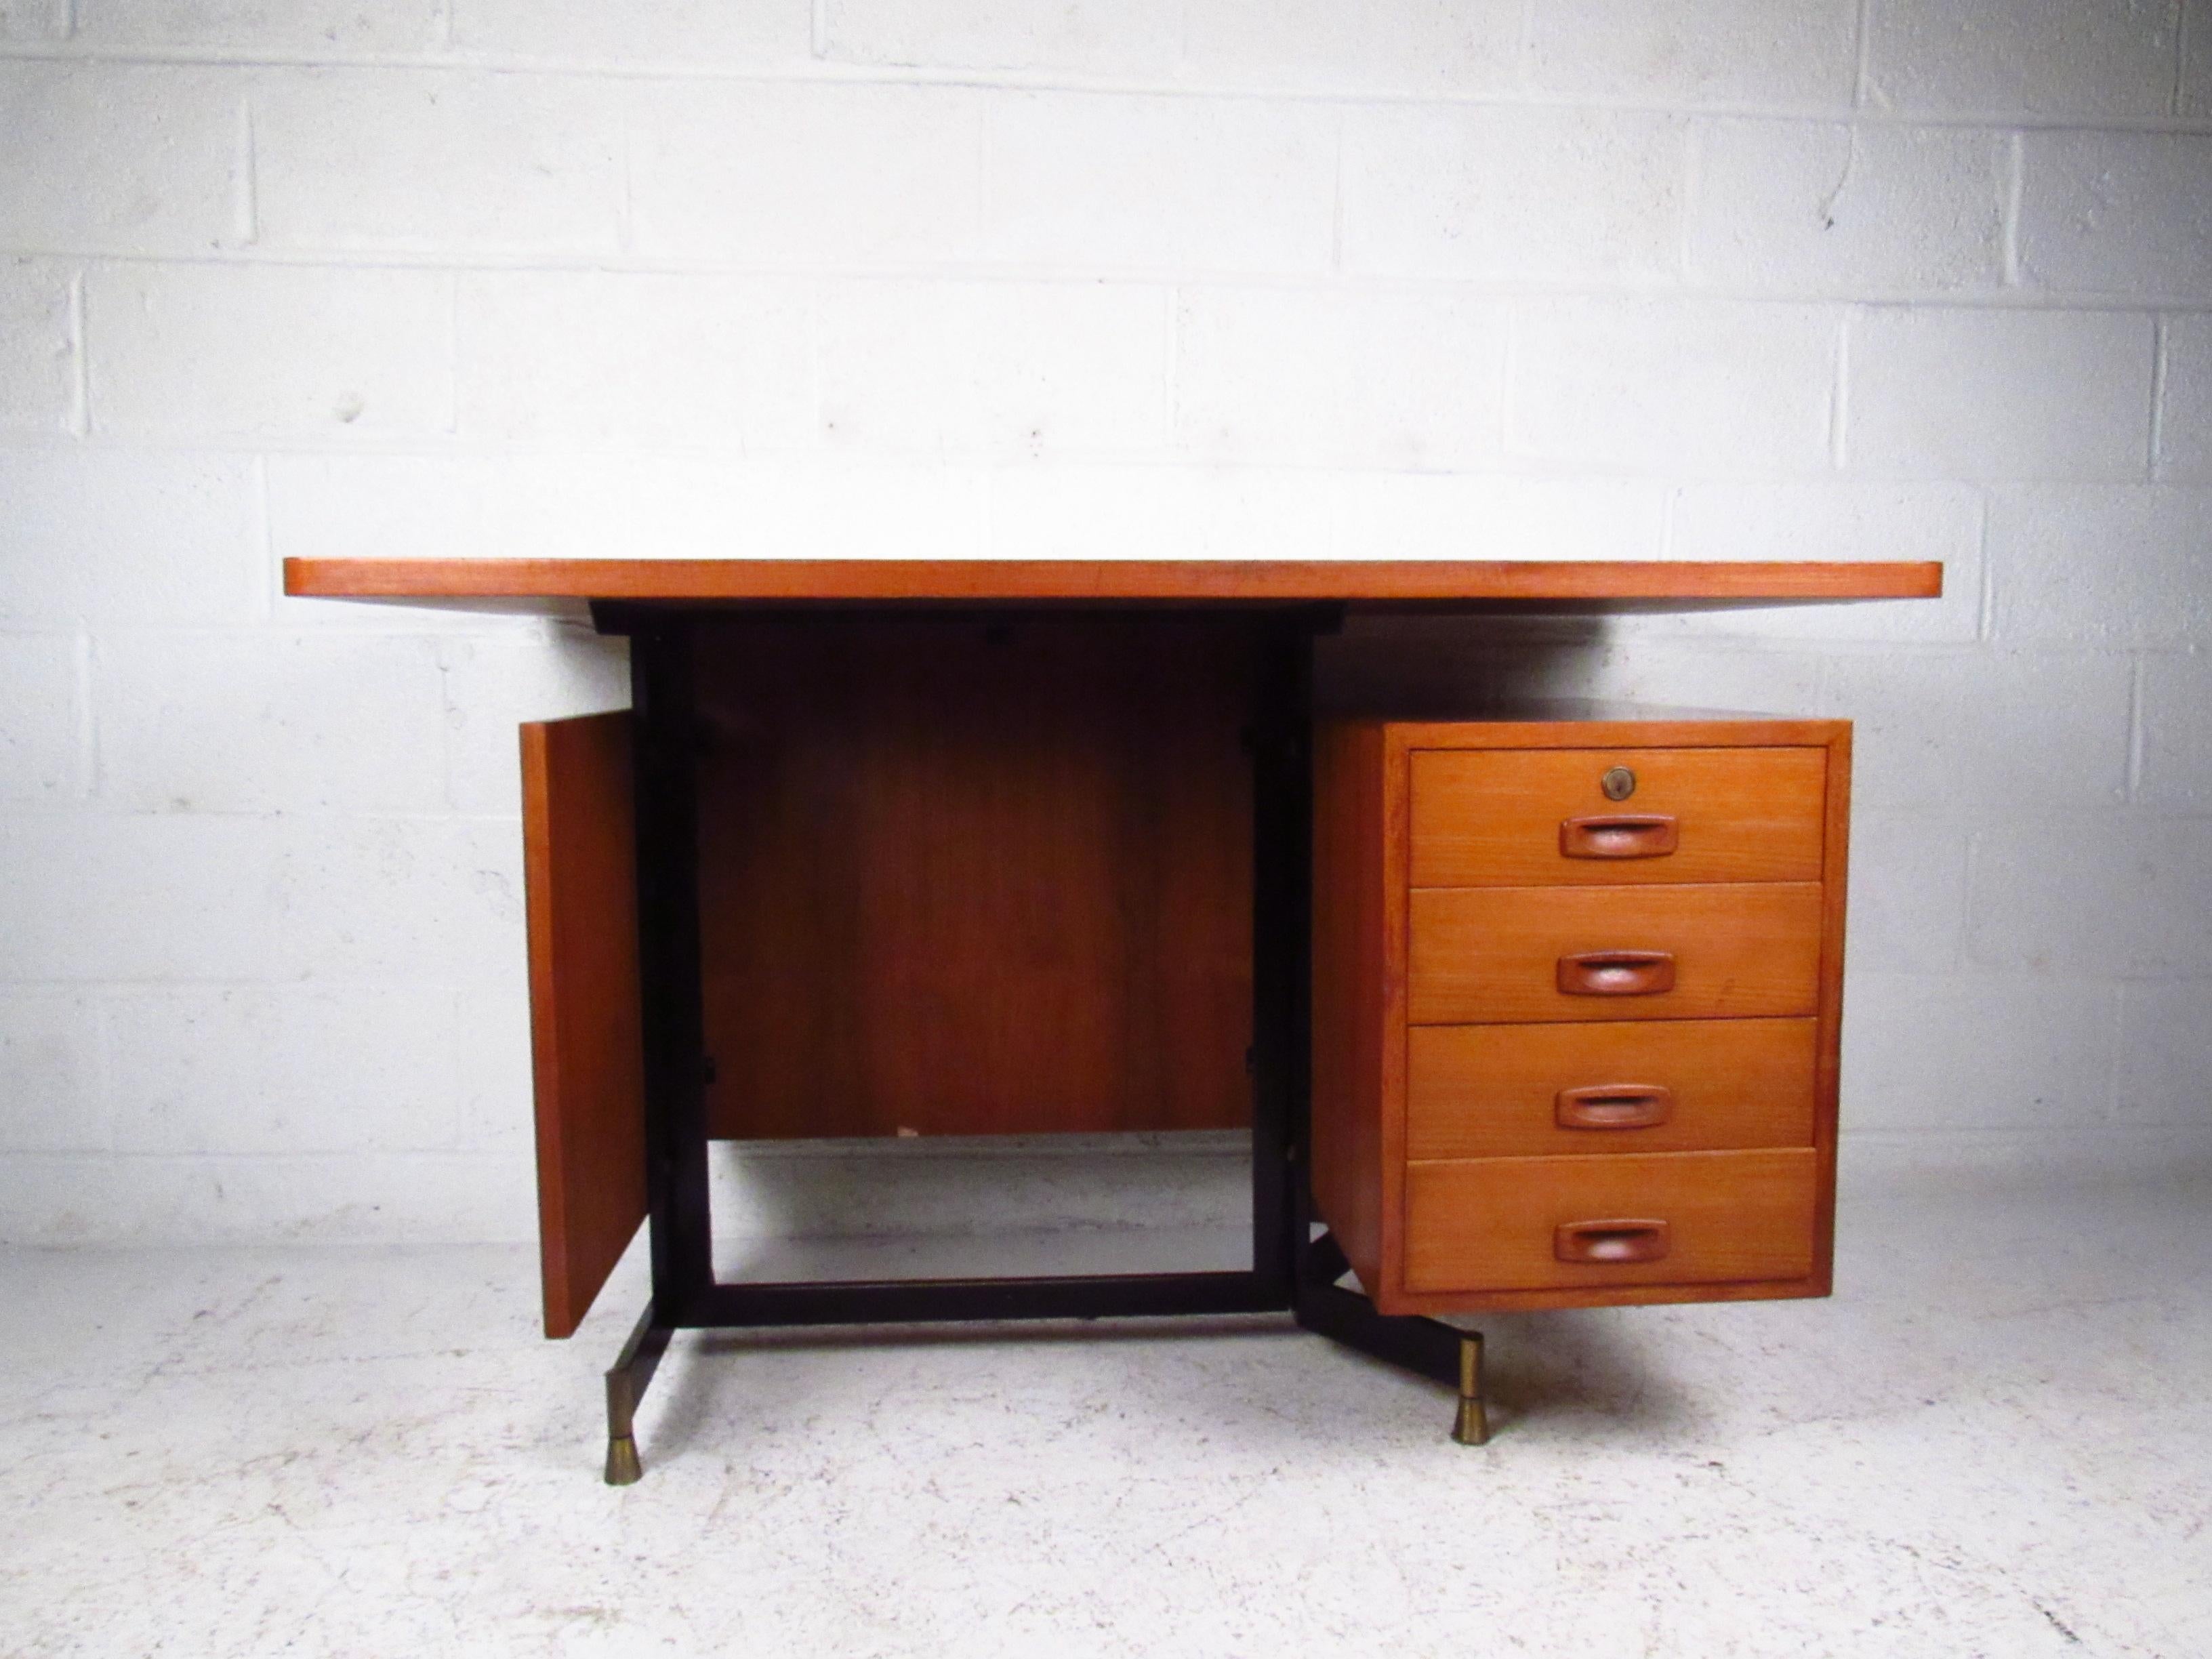 Single pedestal teak desk with floating top, four-drawer cabinet, carved recessed pulls, and metal structural frame. Please confirm item location (NY or NJ) with dealer.